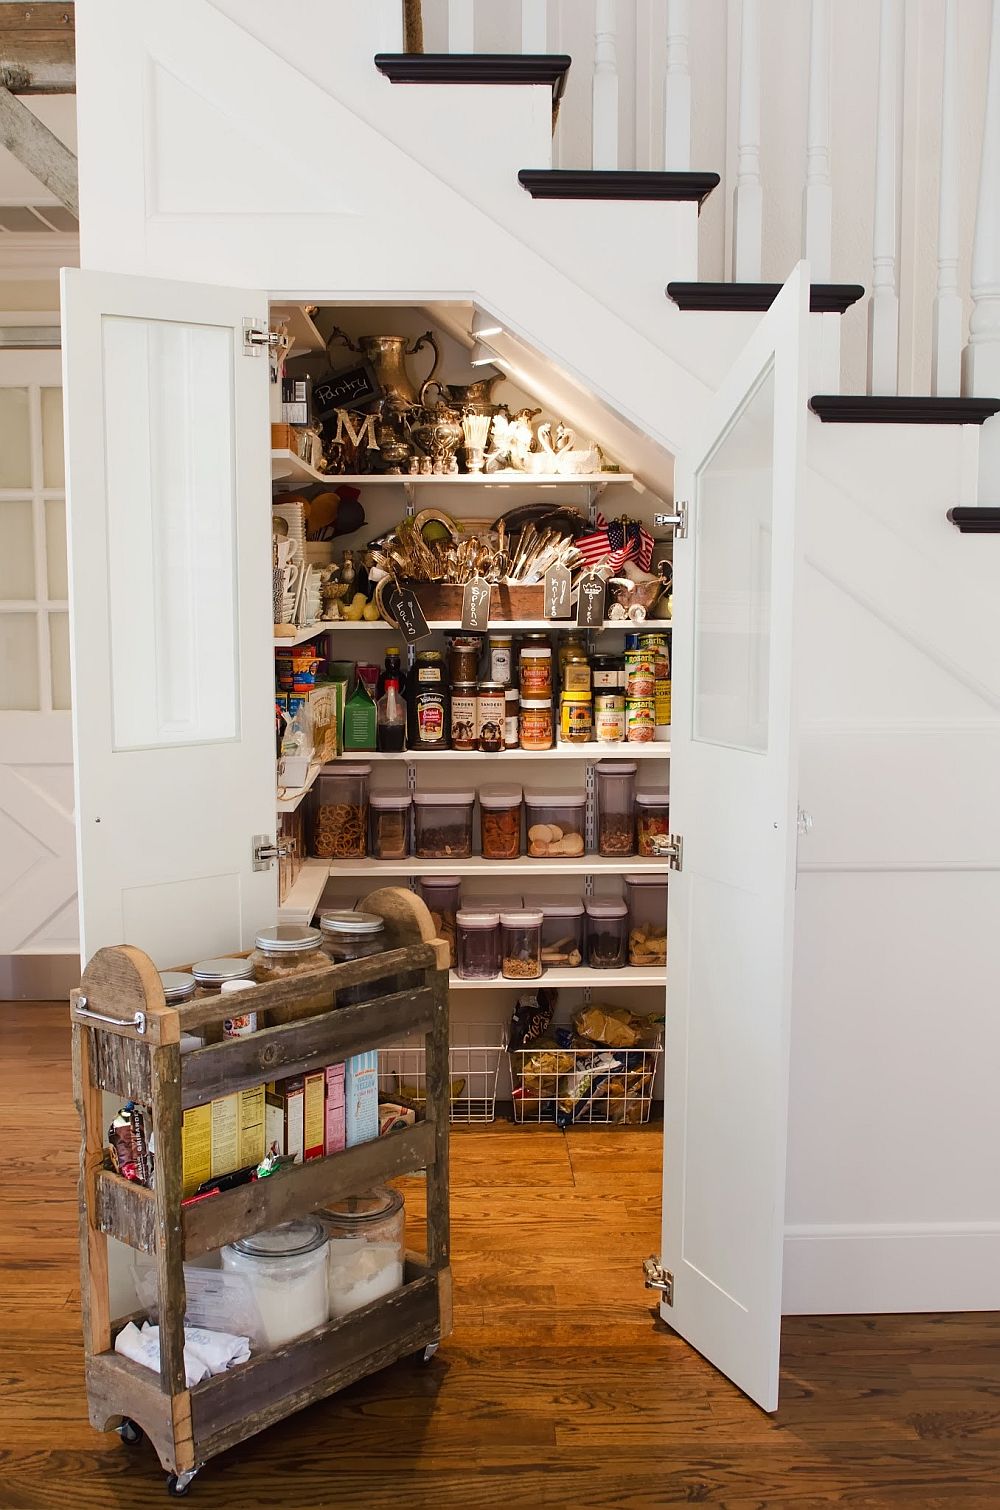 Space-underneath-the-staircase-can-be-easily-transformed-into-a-pantry